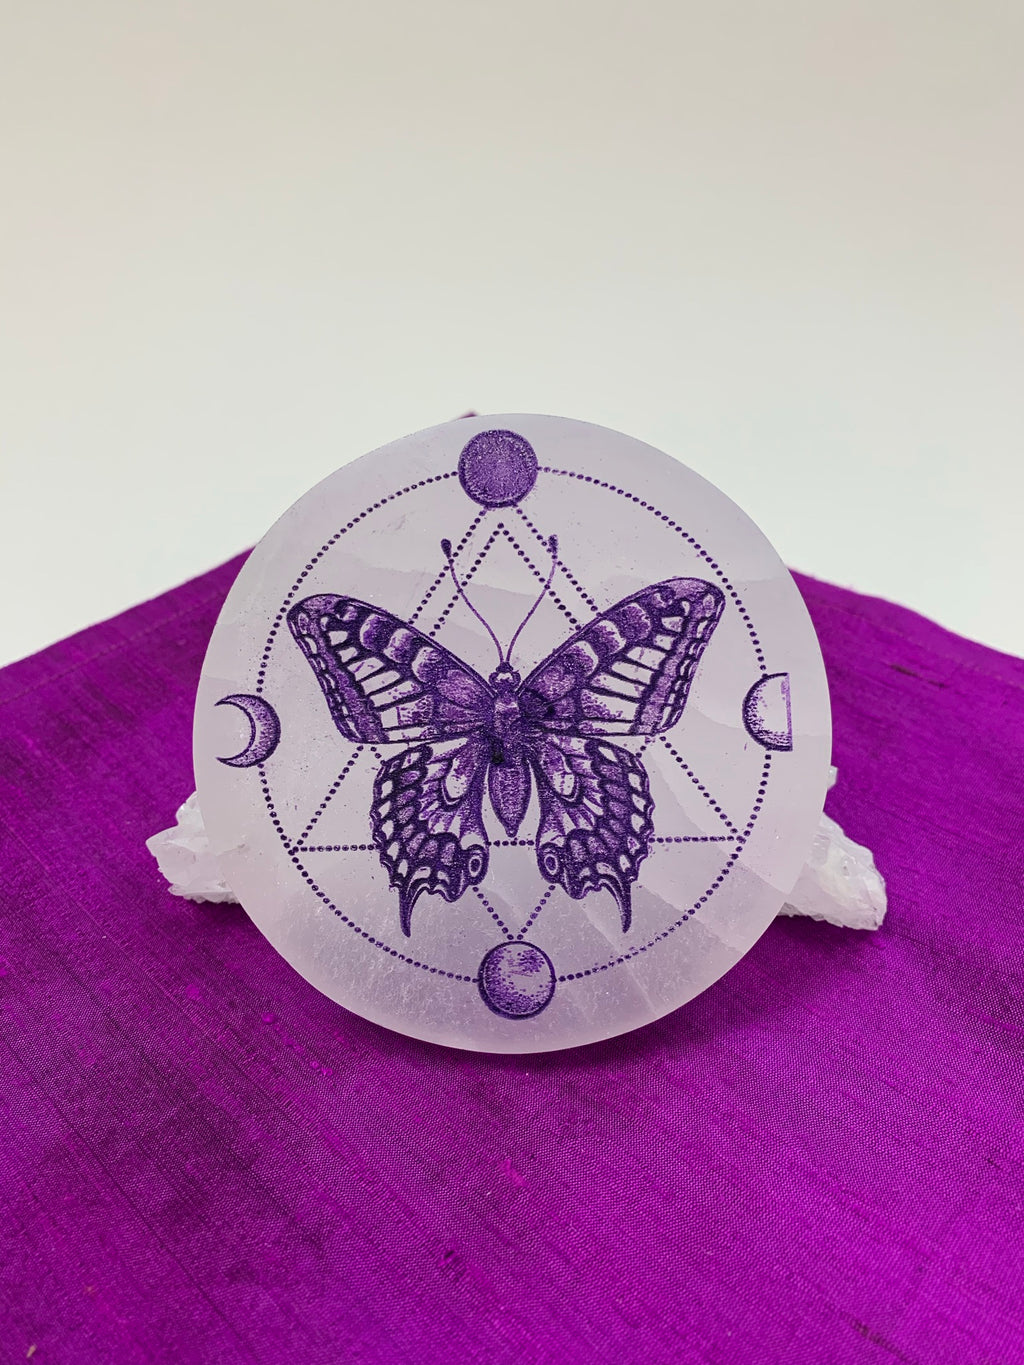 Gorgeous white selenite charging plate with a butterfly in the middle of the plate and moon phases (4) around her with circular and triangular dot designs. Butterfly and other designs are painted purple. The plate is approximately 4" in diameter and approximately ½" thick. It weighs about 9.1 ounces. Butterfly symbolizes transformation and the moon symbolizes feminine energy, intuition and emotions. Selenite plates are used for charging other crystals, gemstones and jewelry. 